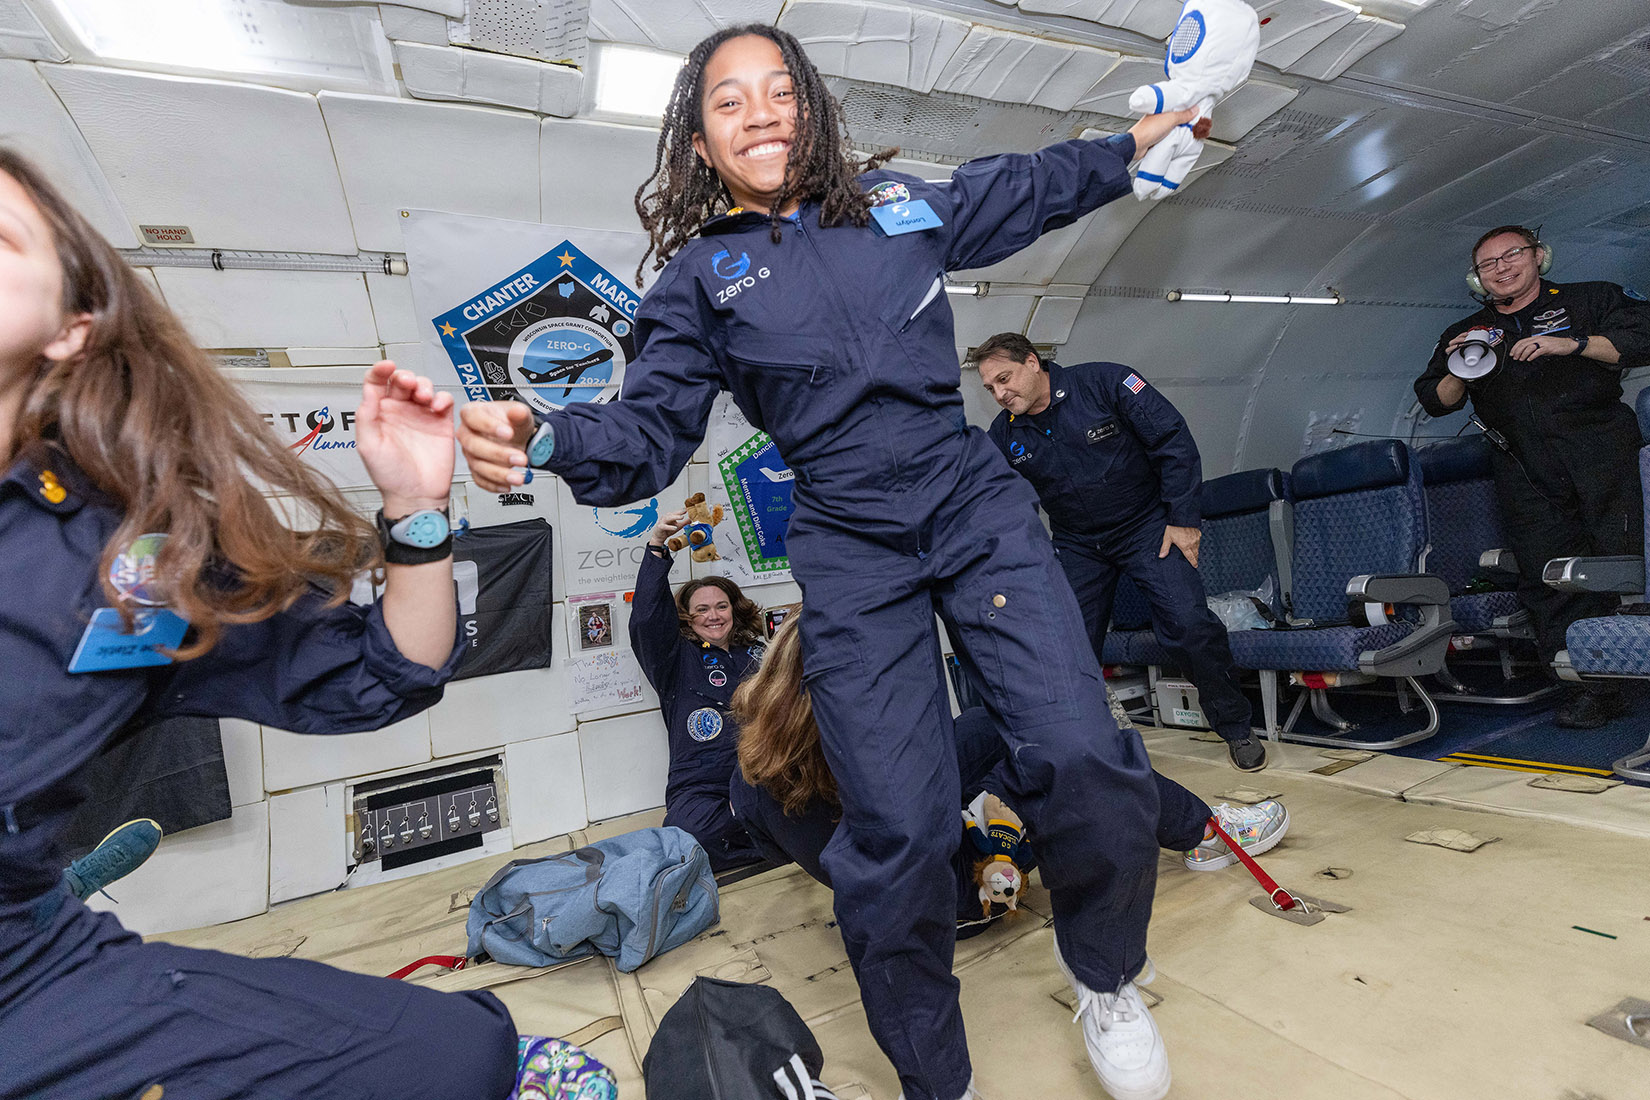 Photo of SEES intern, Londyn Franklin, floating and smling in her flightt suit while holding a stuffed animal. She is on an airplane during zero-g session. Other people in flight suits float, stand, and smile in the background, holding various items like stuffed animals. One person holds a megaphone.